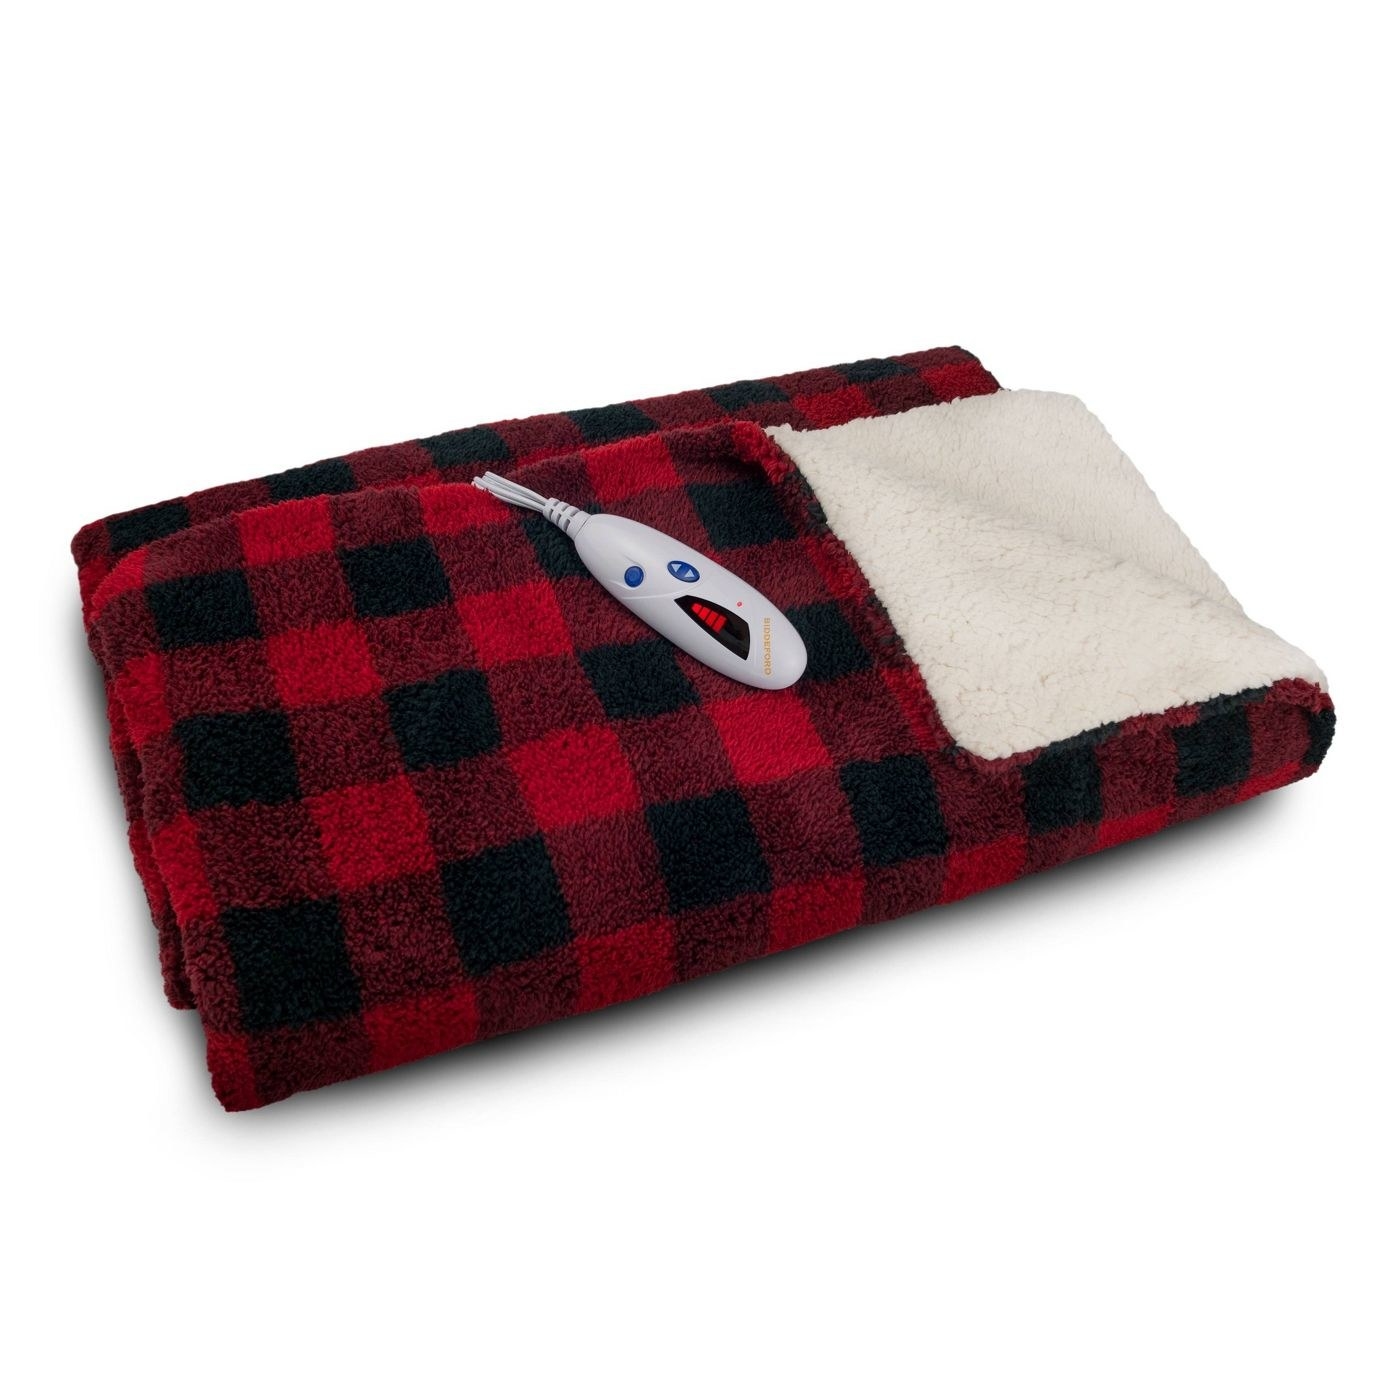 A red plaid electric blanket